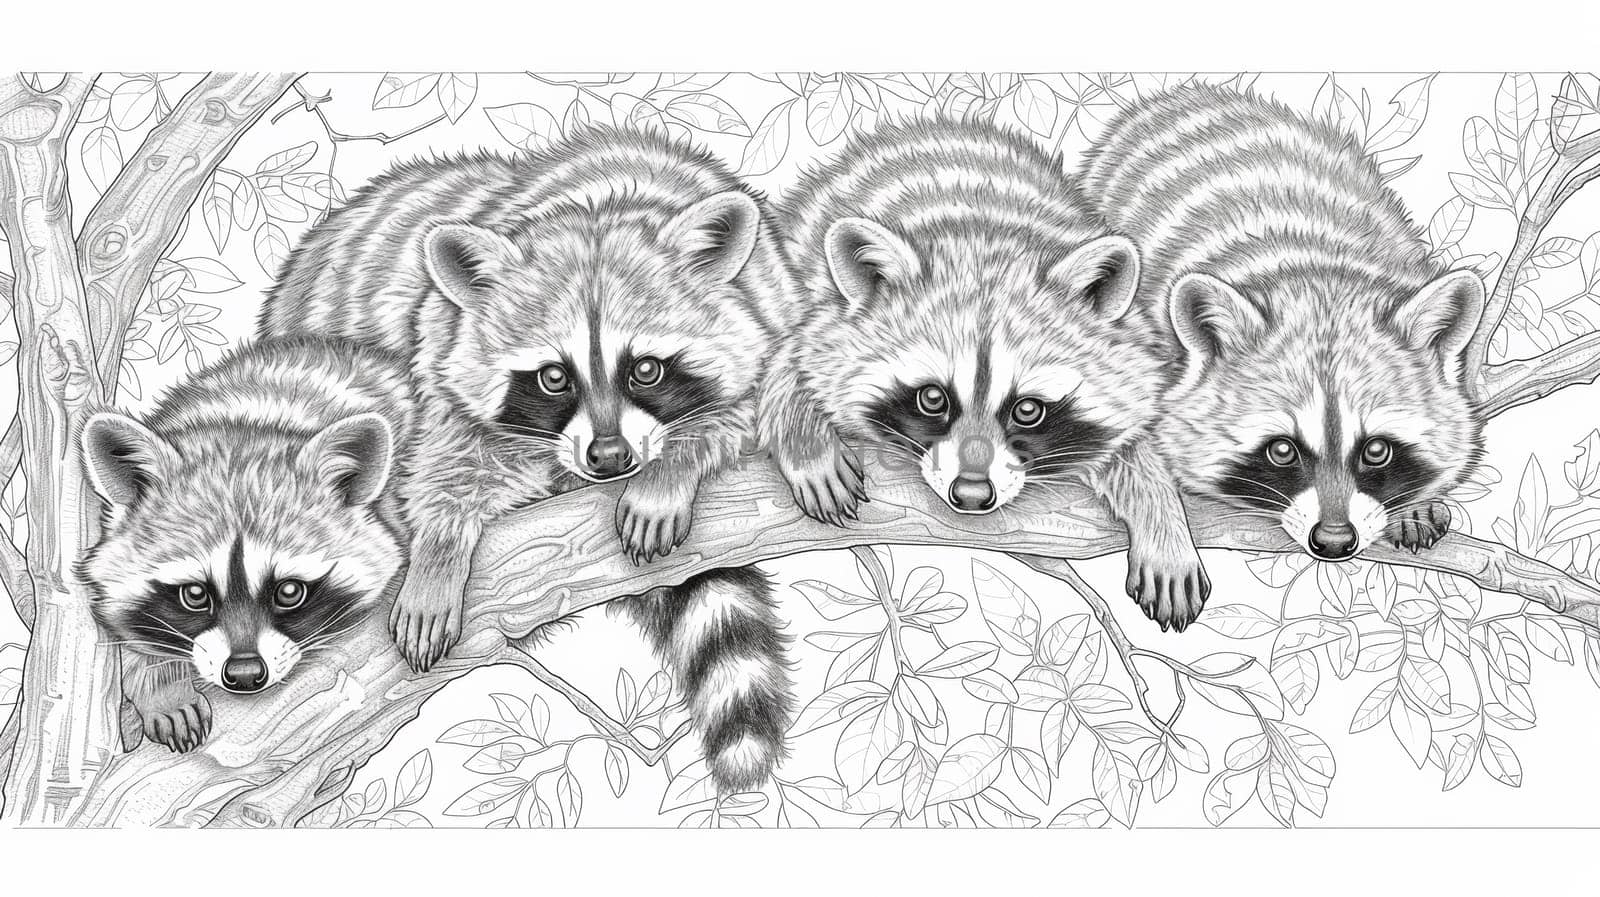 Three raccoons are sitting on a branch in this coloring page, AI by starush